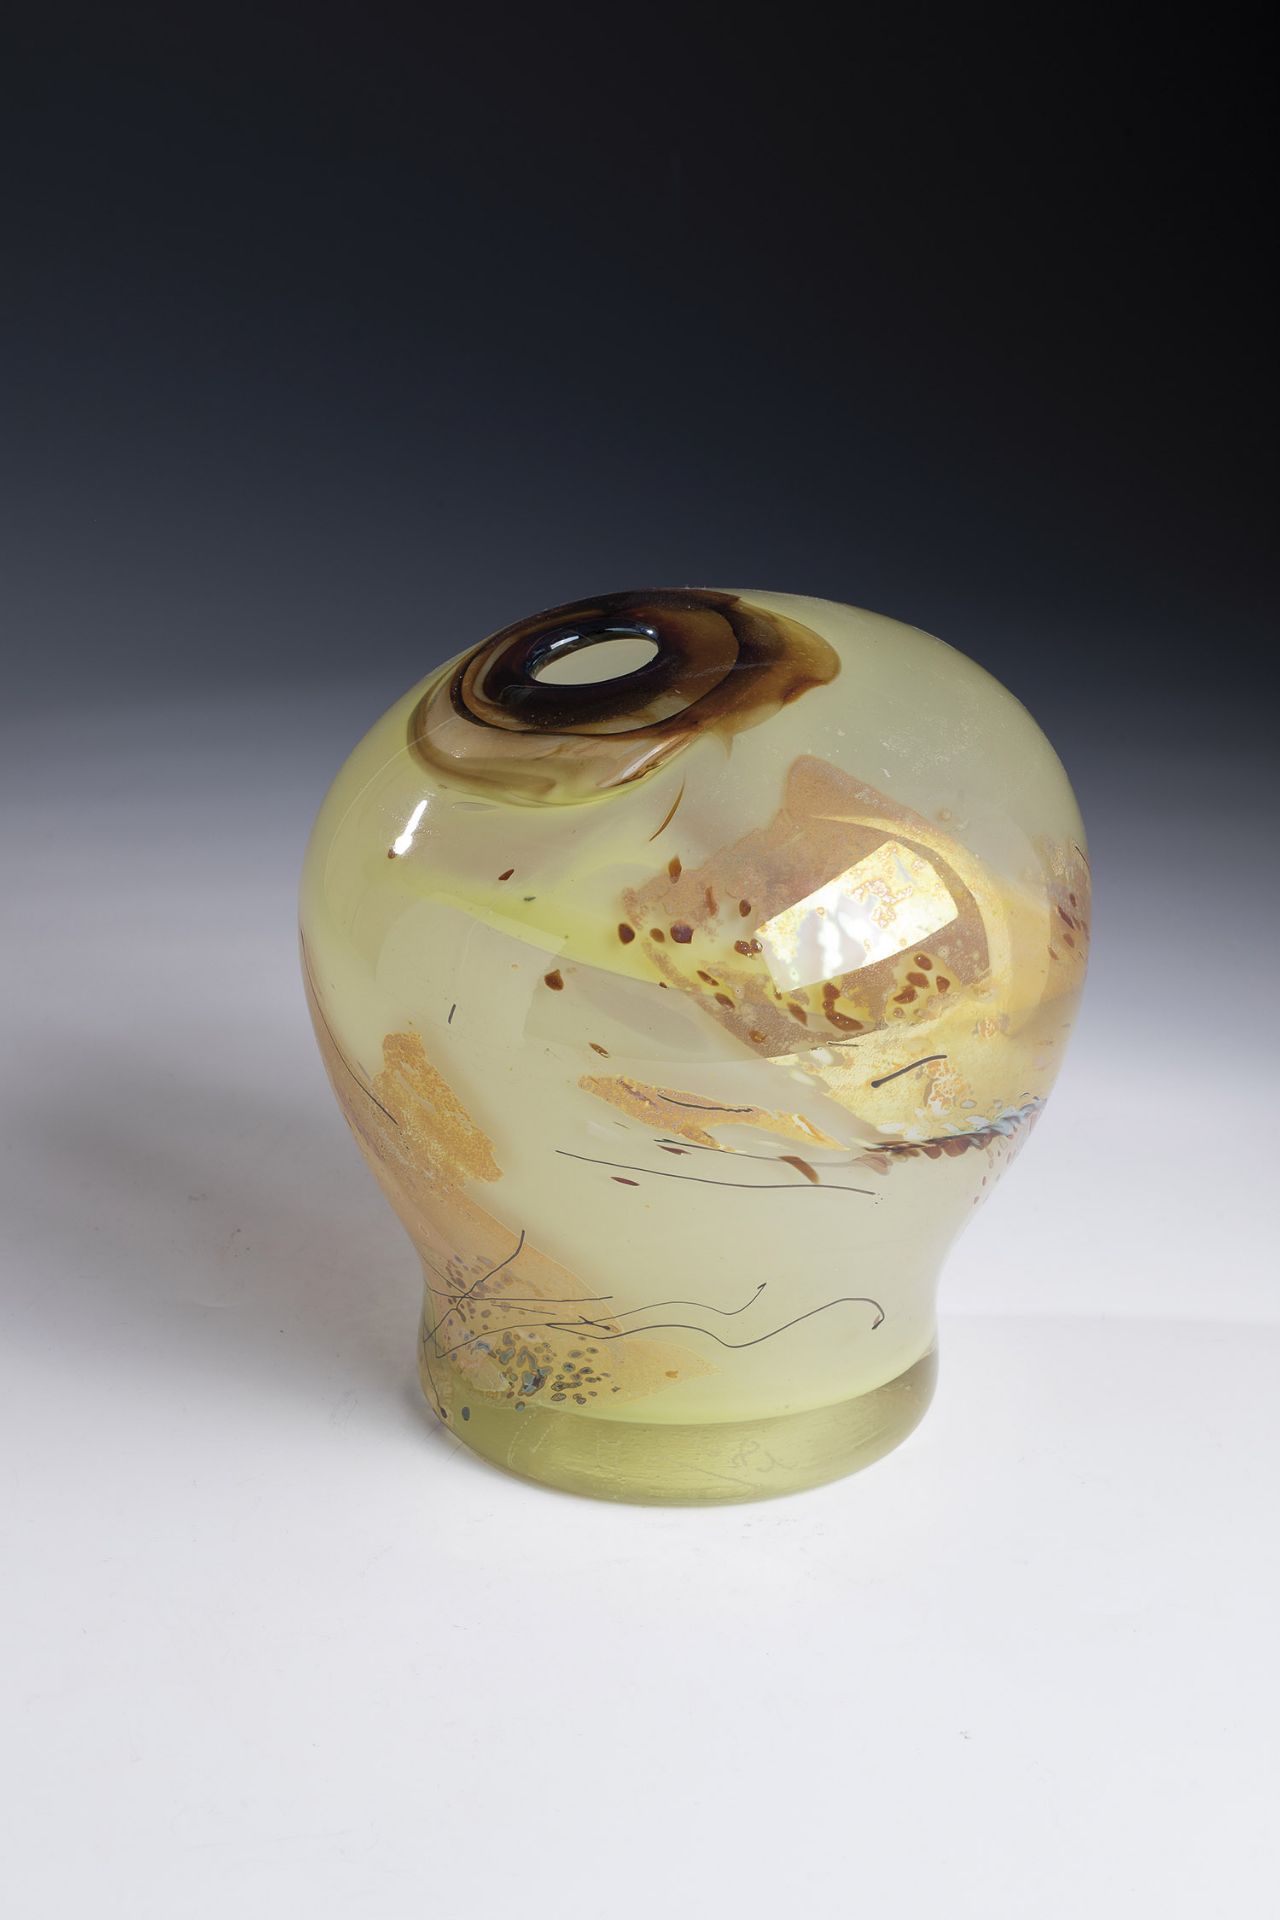 Vase Samuel J. Herman, 1982 Colorless glass with colored melts. Free-formed. Signed, dated and